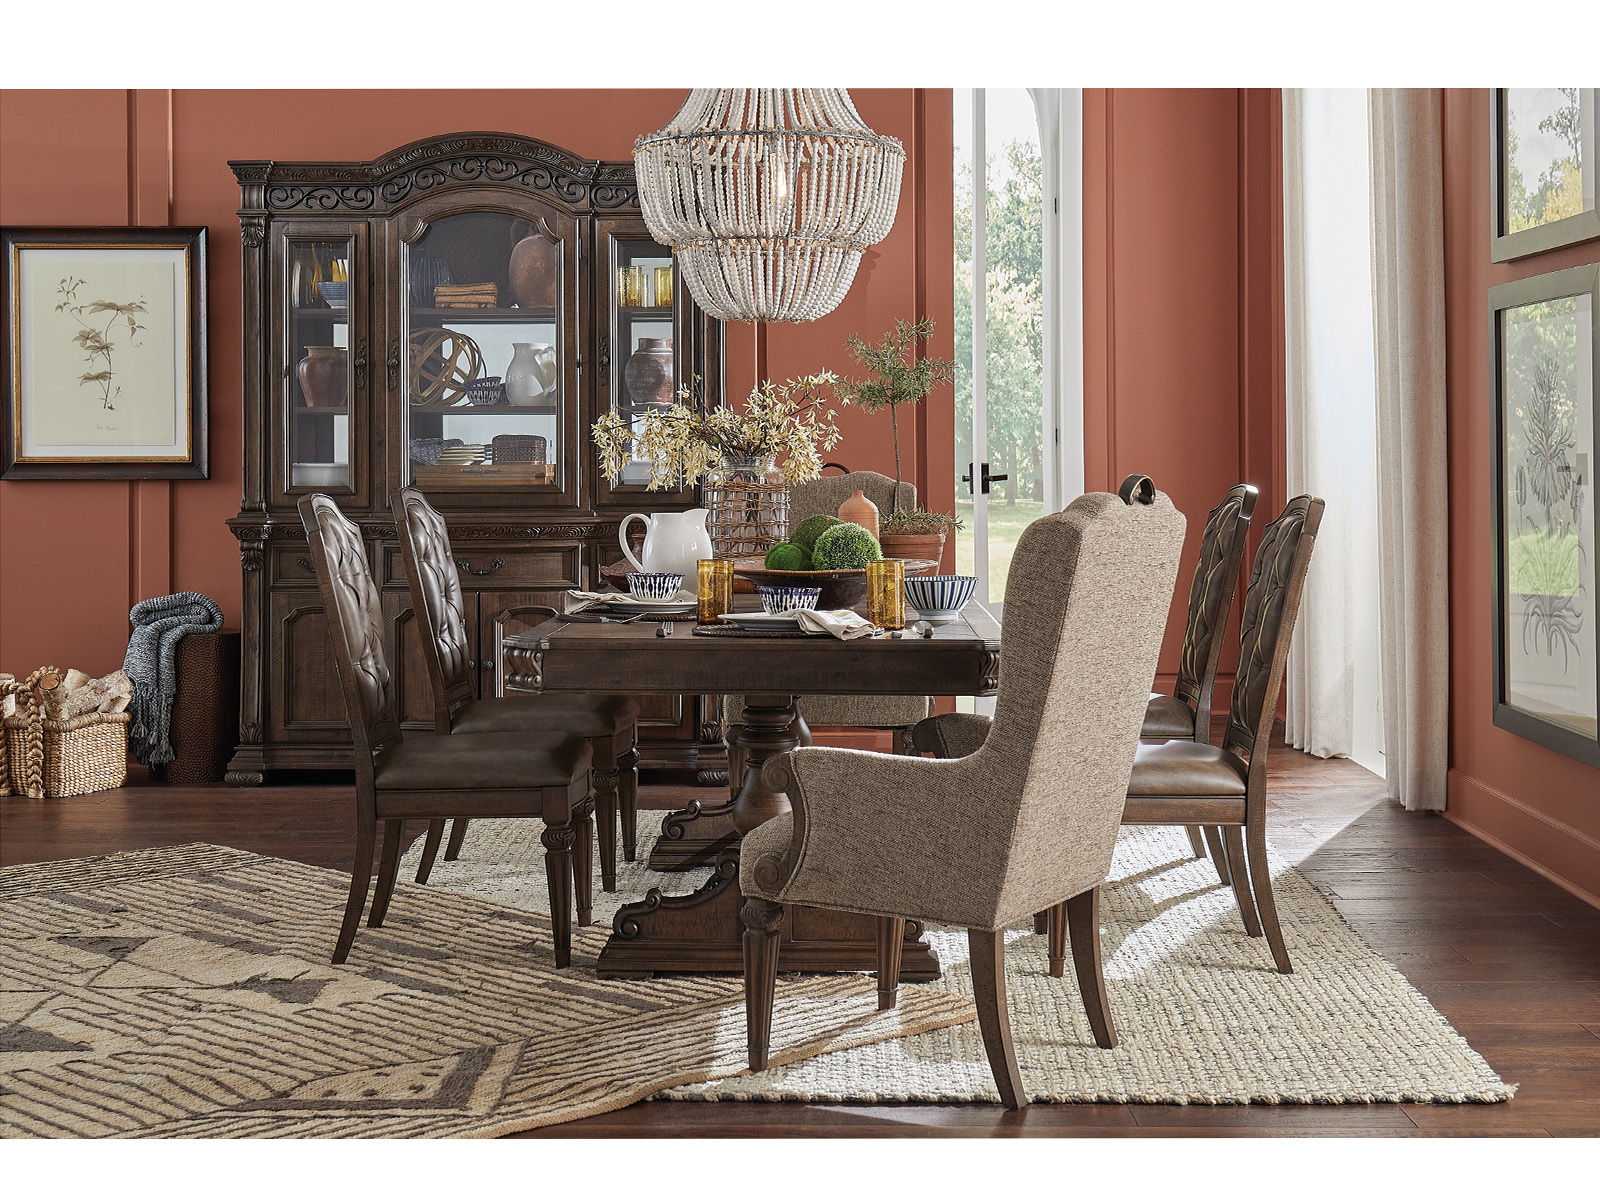 Durango - Wood Dining Side Chair With Upholstered Seat and Back (Set of 2) - Willadeene Brown